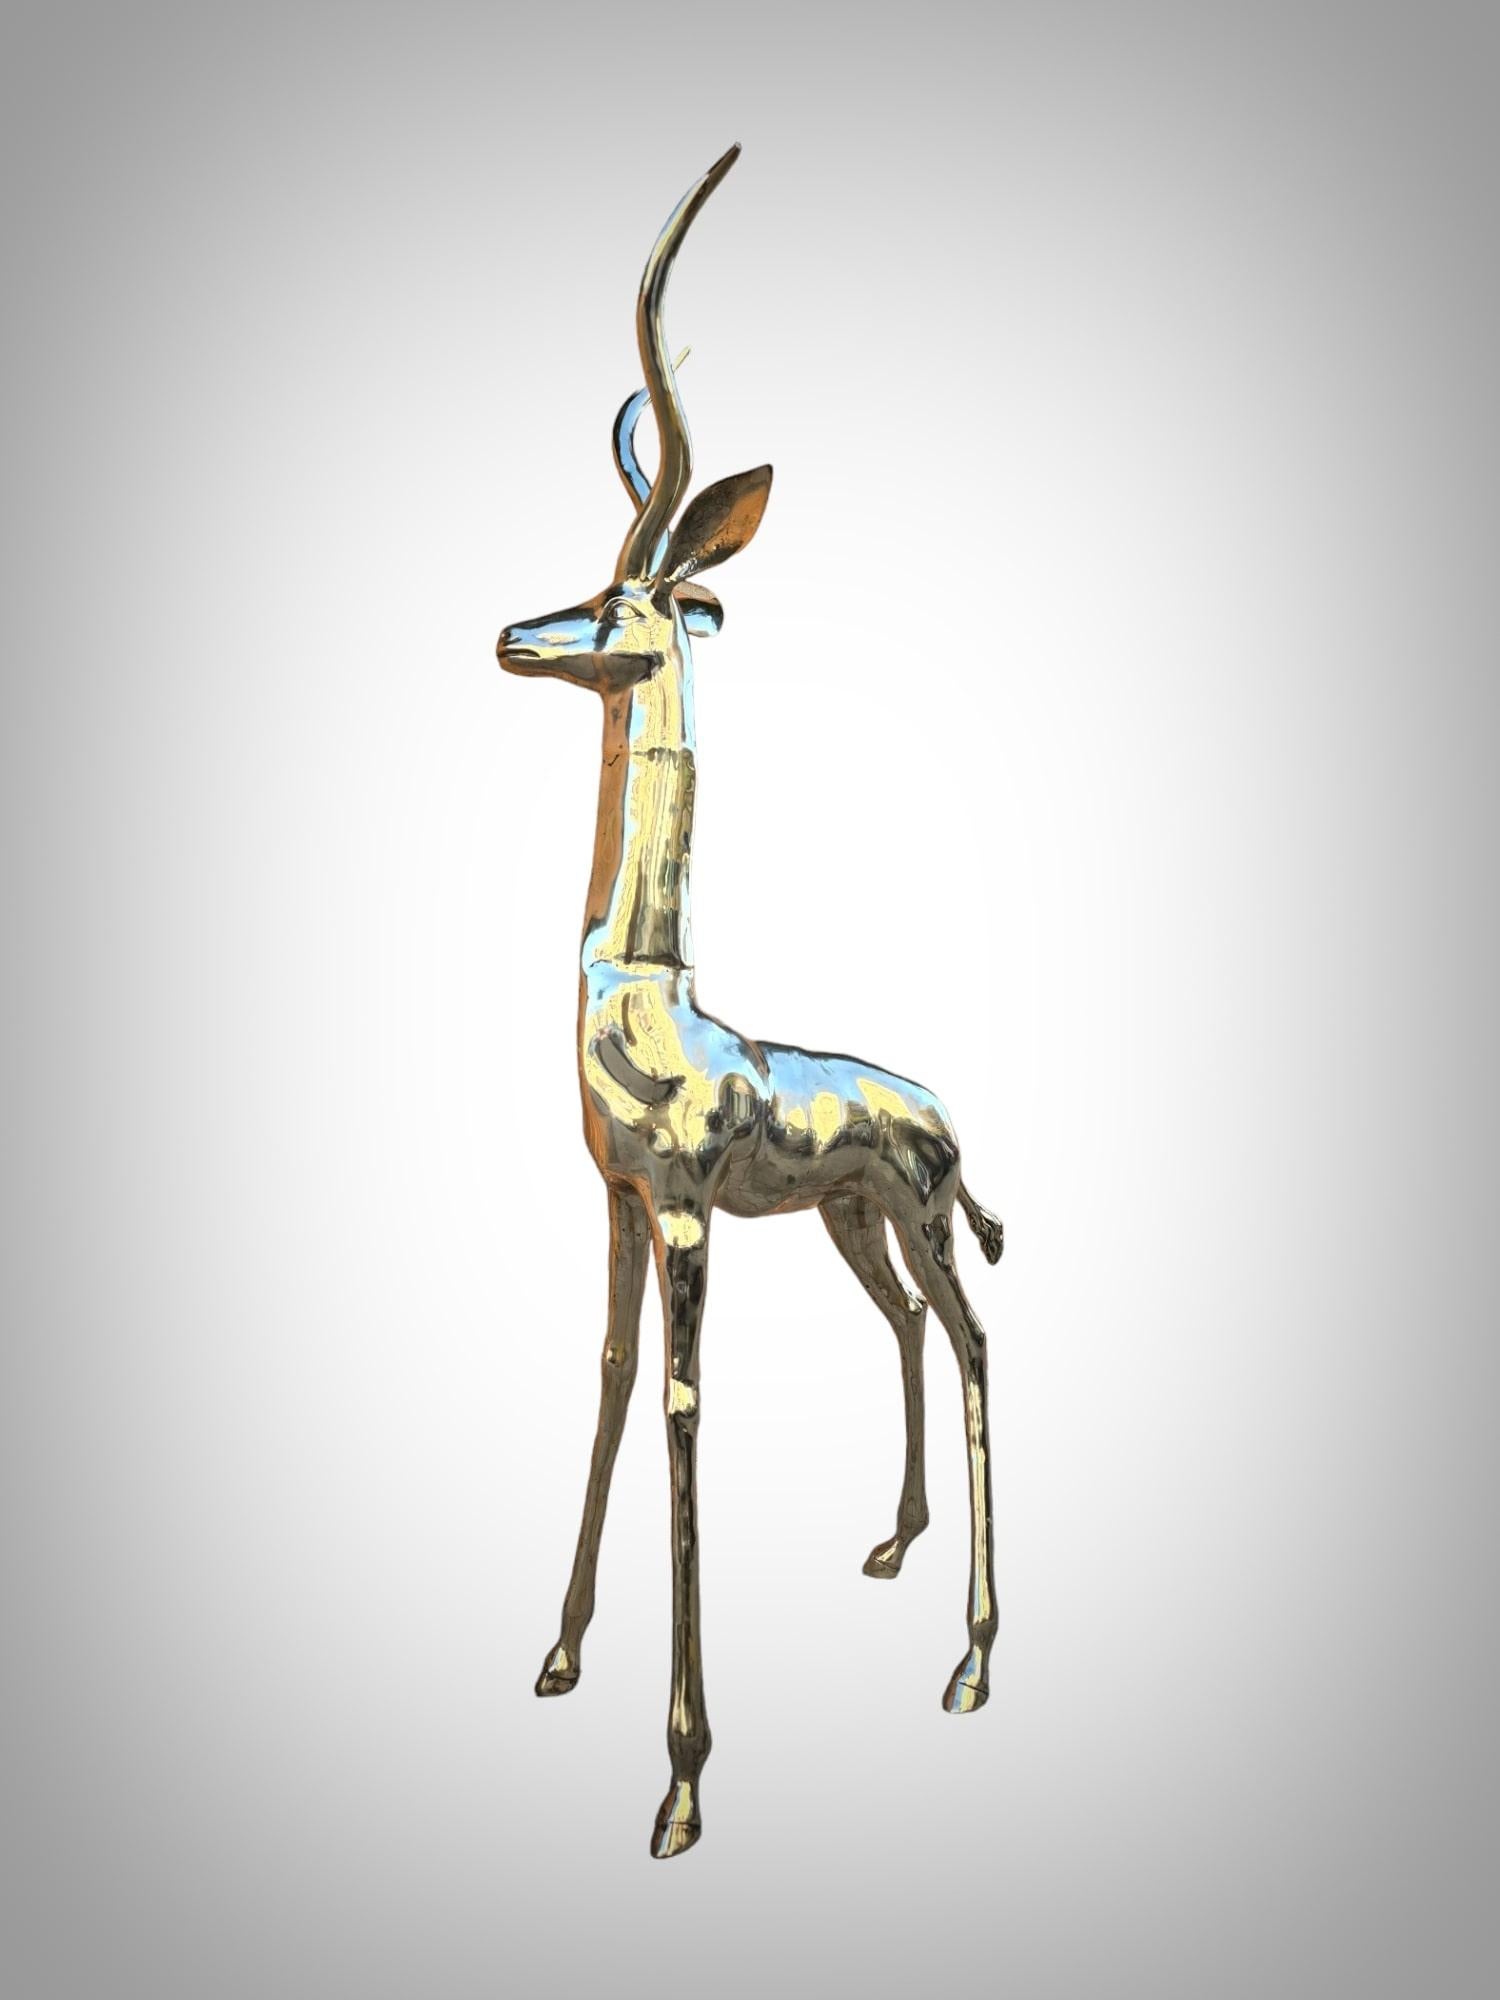 Exquisite Polished Bronze Sculpture: Lifesize Antelope from the 1950s For Sale 12